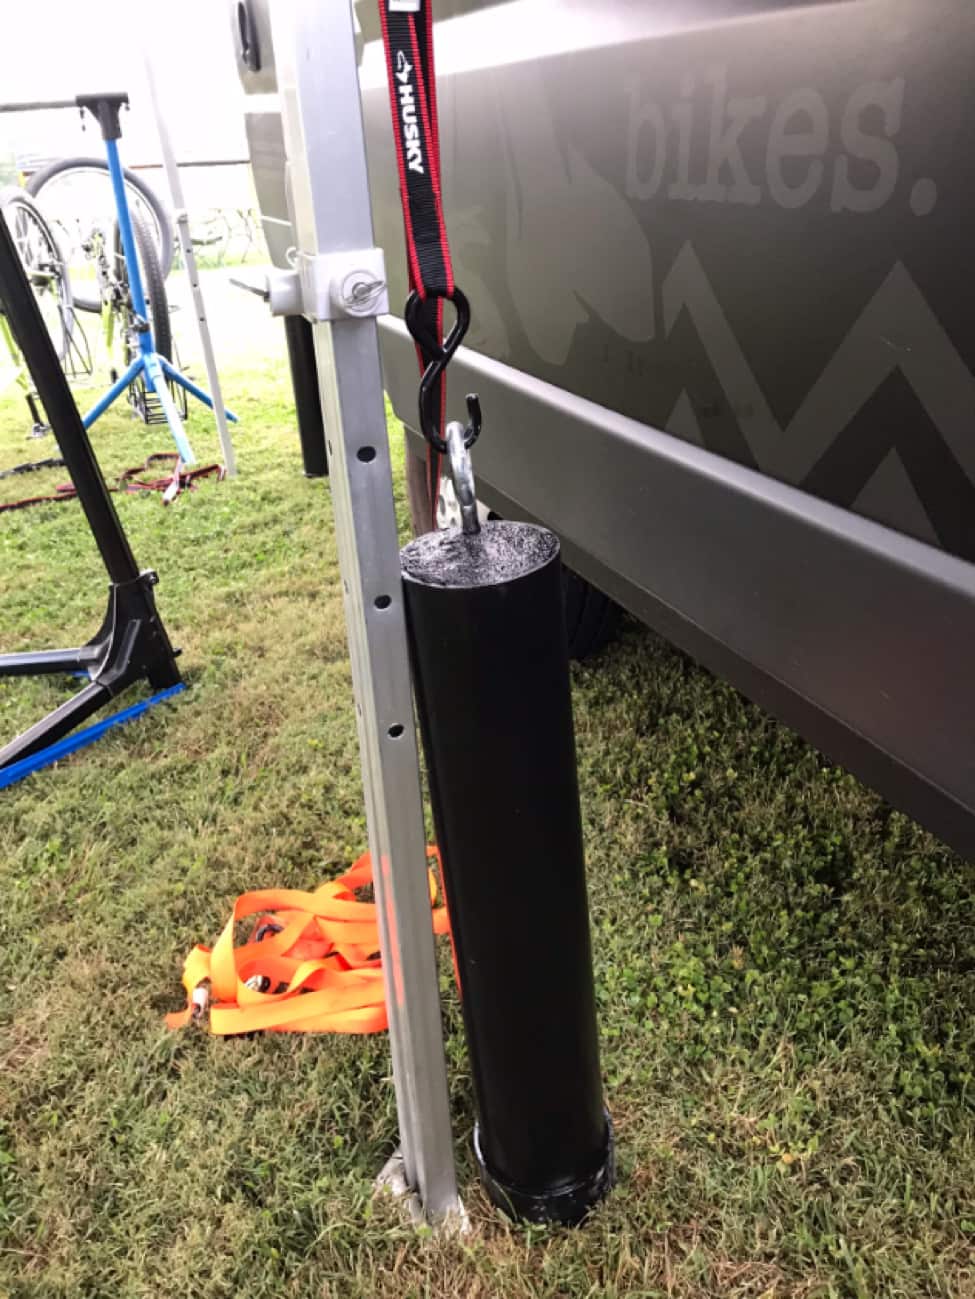 An upright leg of a canopy and anchor post next to a black Surly van on grass, with bike repair stands in the background